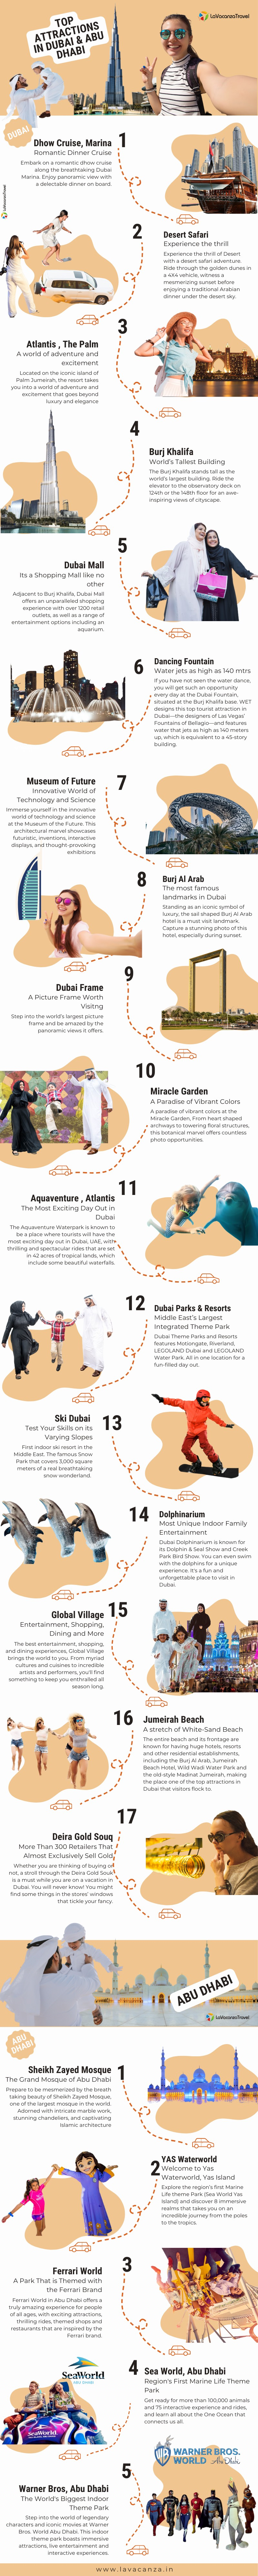 Top Attractions in Dubai and Abu Dhabi for Your Tour